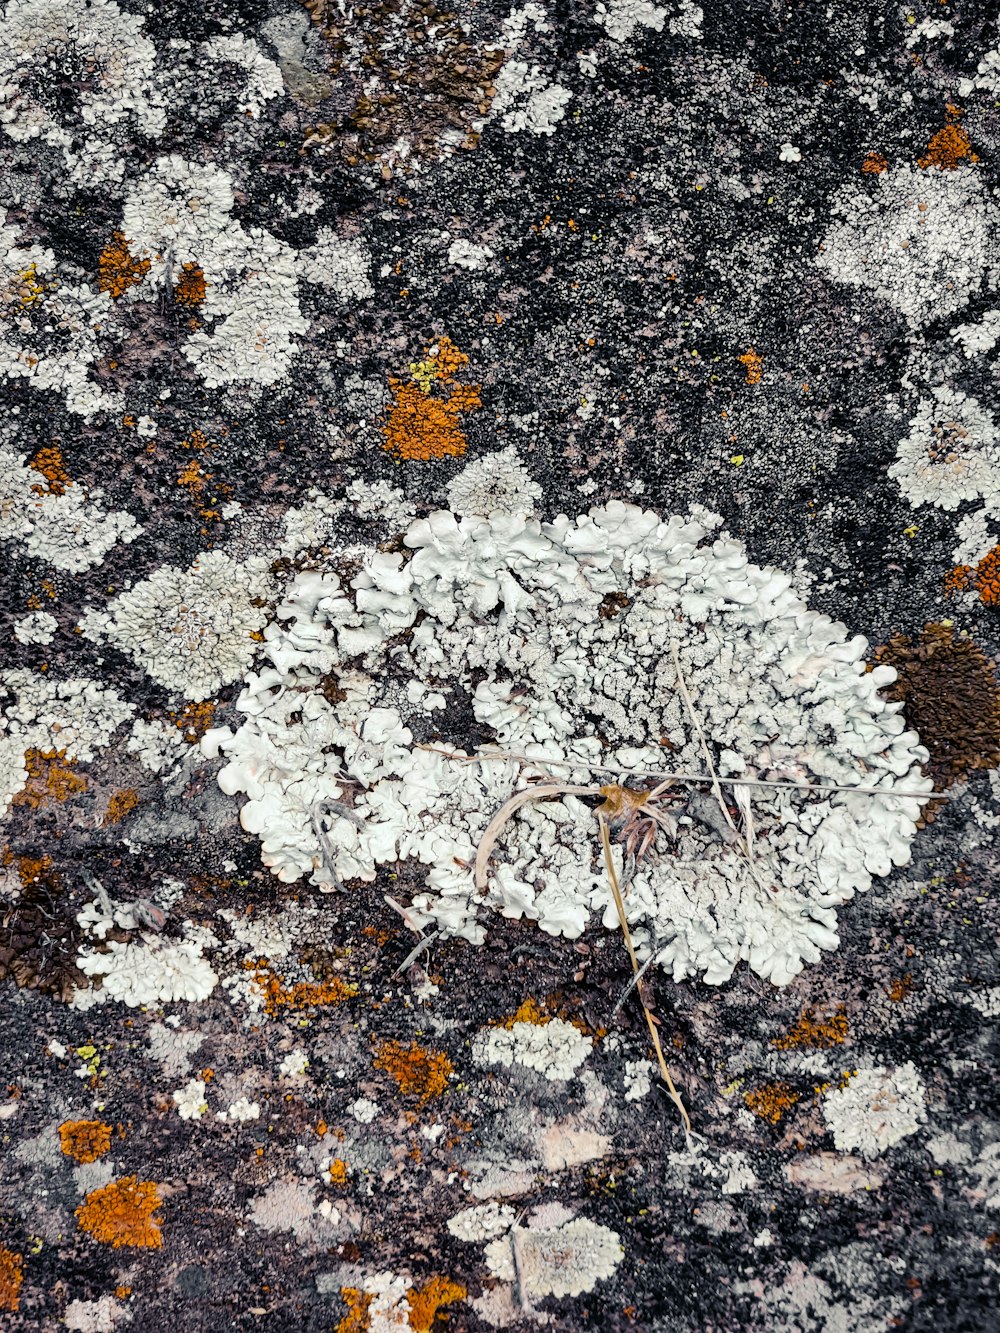 a close up of a rock with lichen and moss growing on it